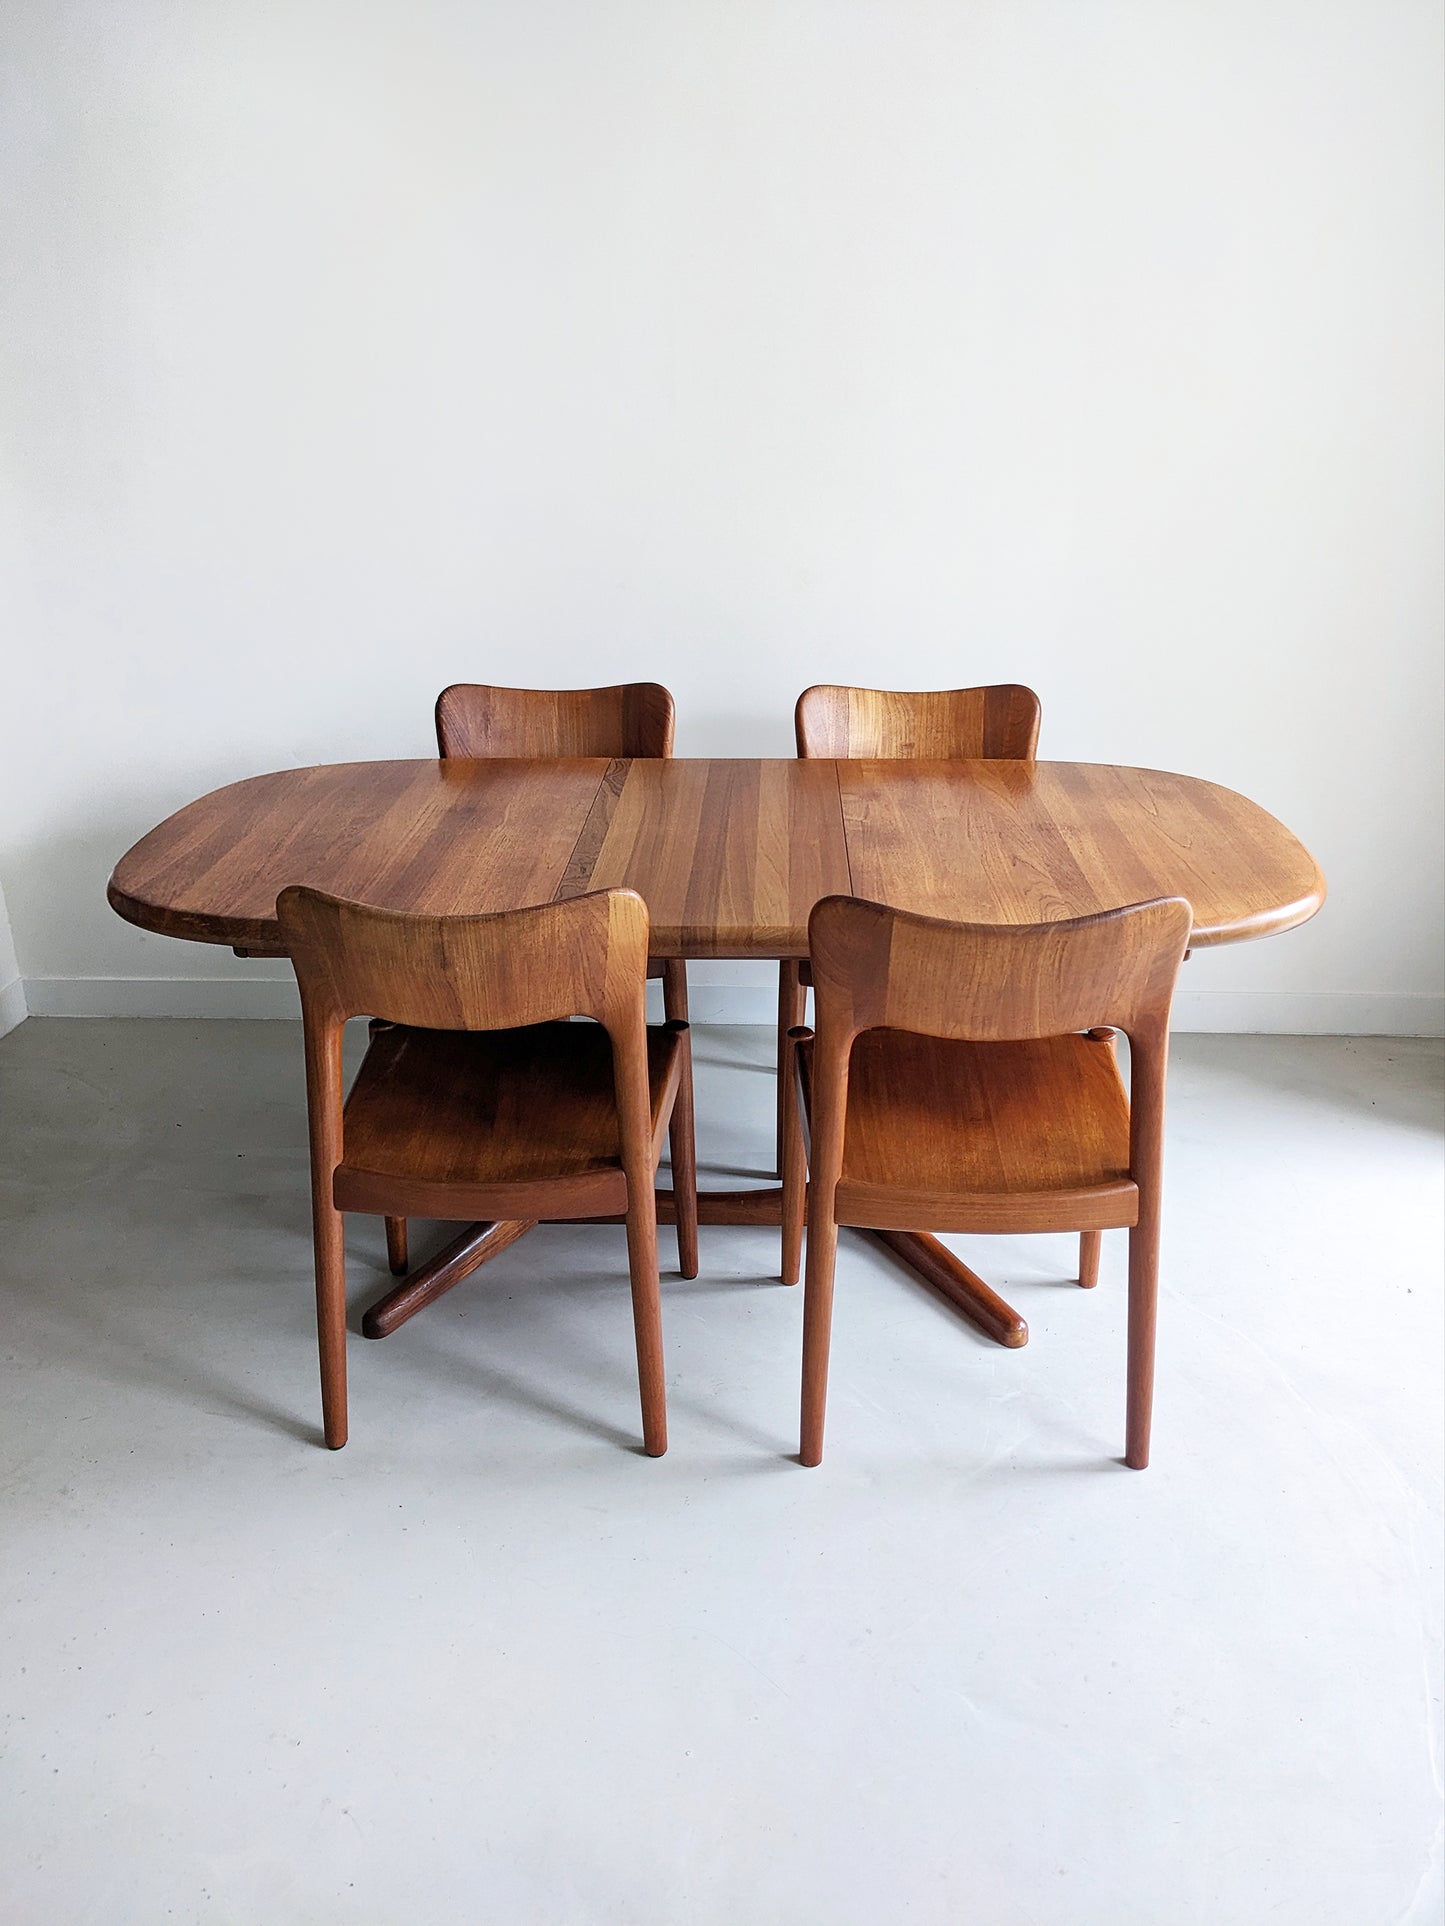 Set of 4 'Ole' Dining Chairs by Niels Koefoed for Hornslet 1960's